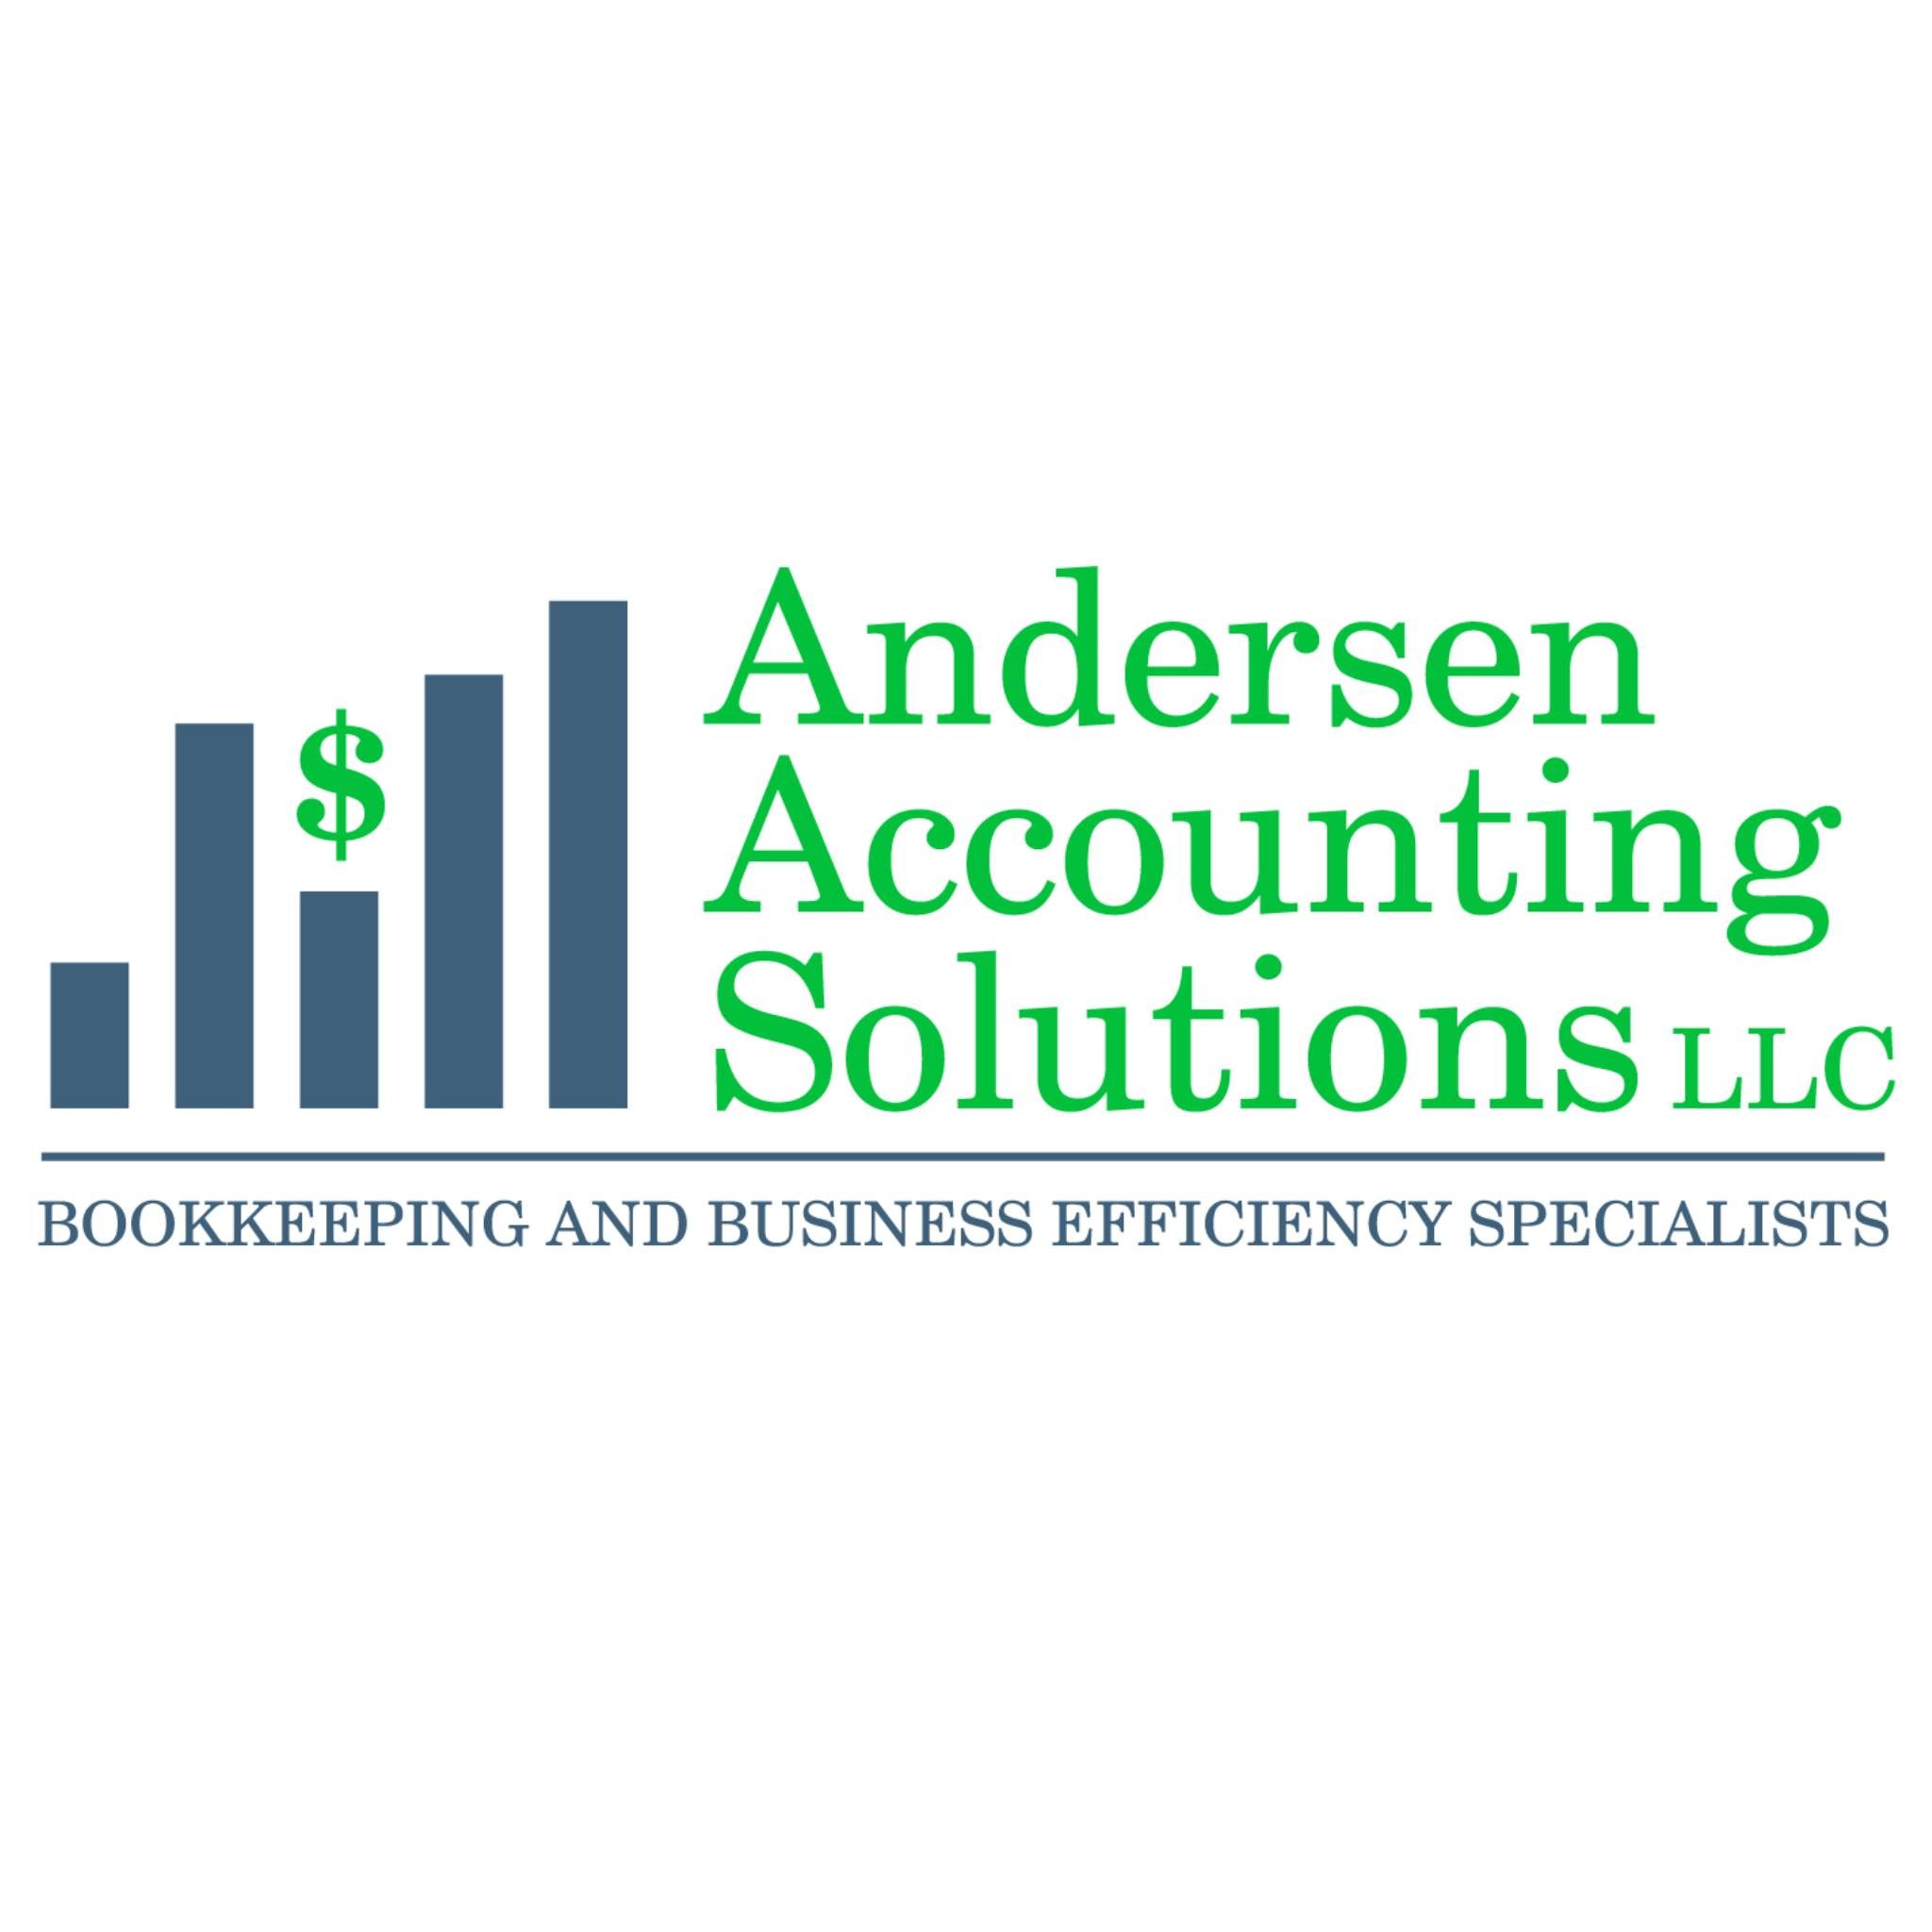 Andersen Accounting Solutions